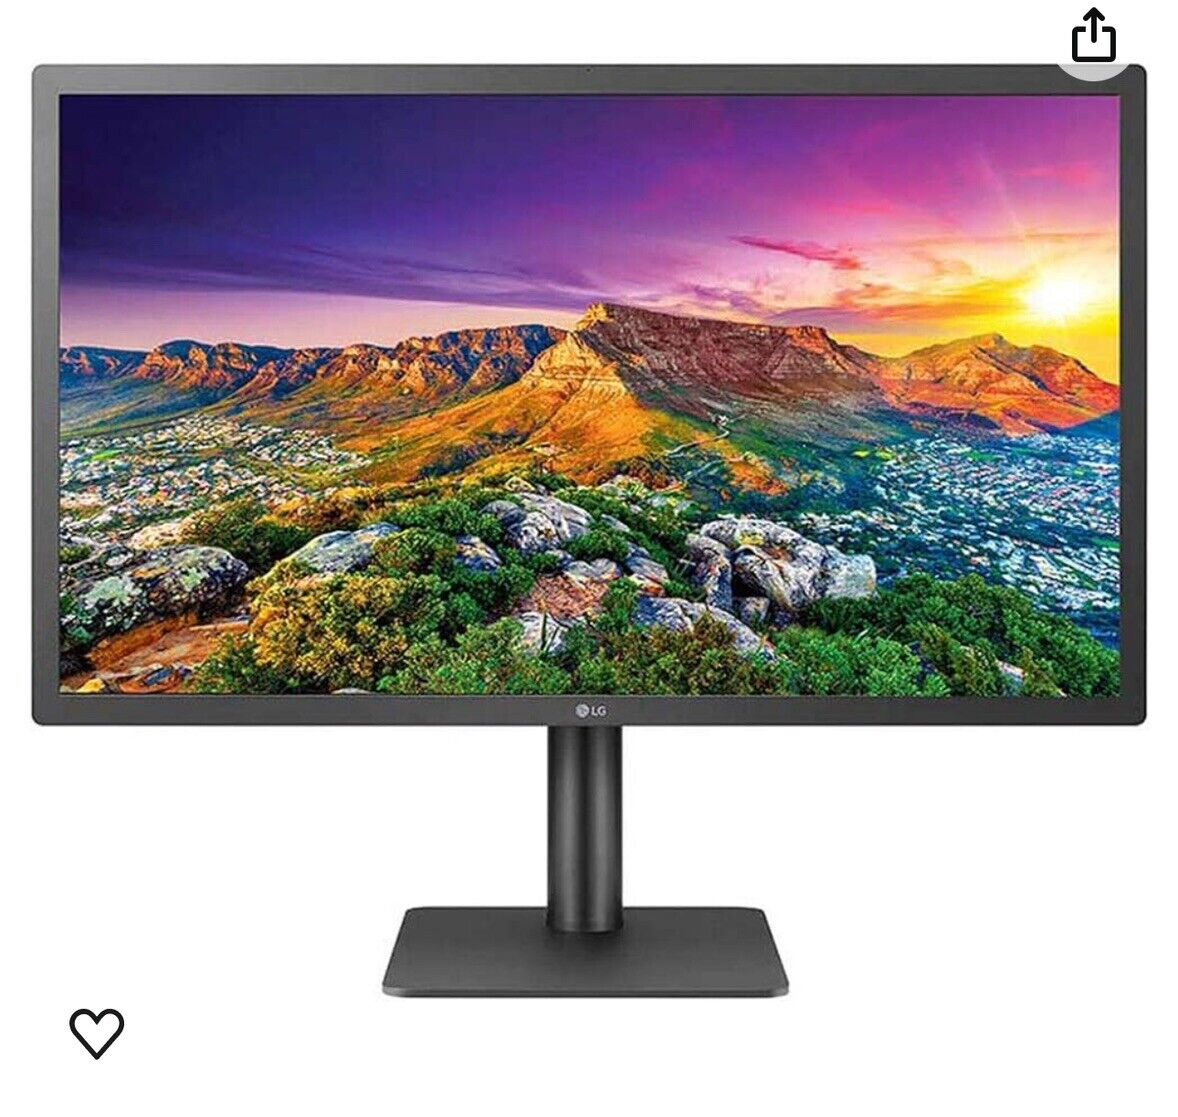 LG 24MD4KL-B Ultrafine 24 inch Widescreen 4K UHD IPS Monitor with macOS...